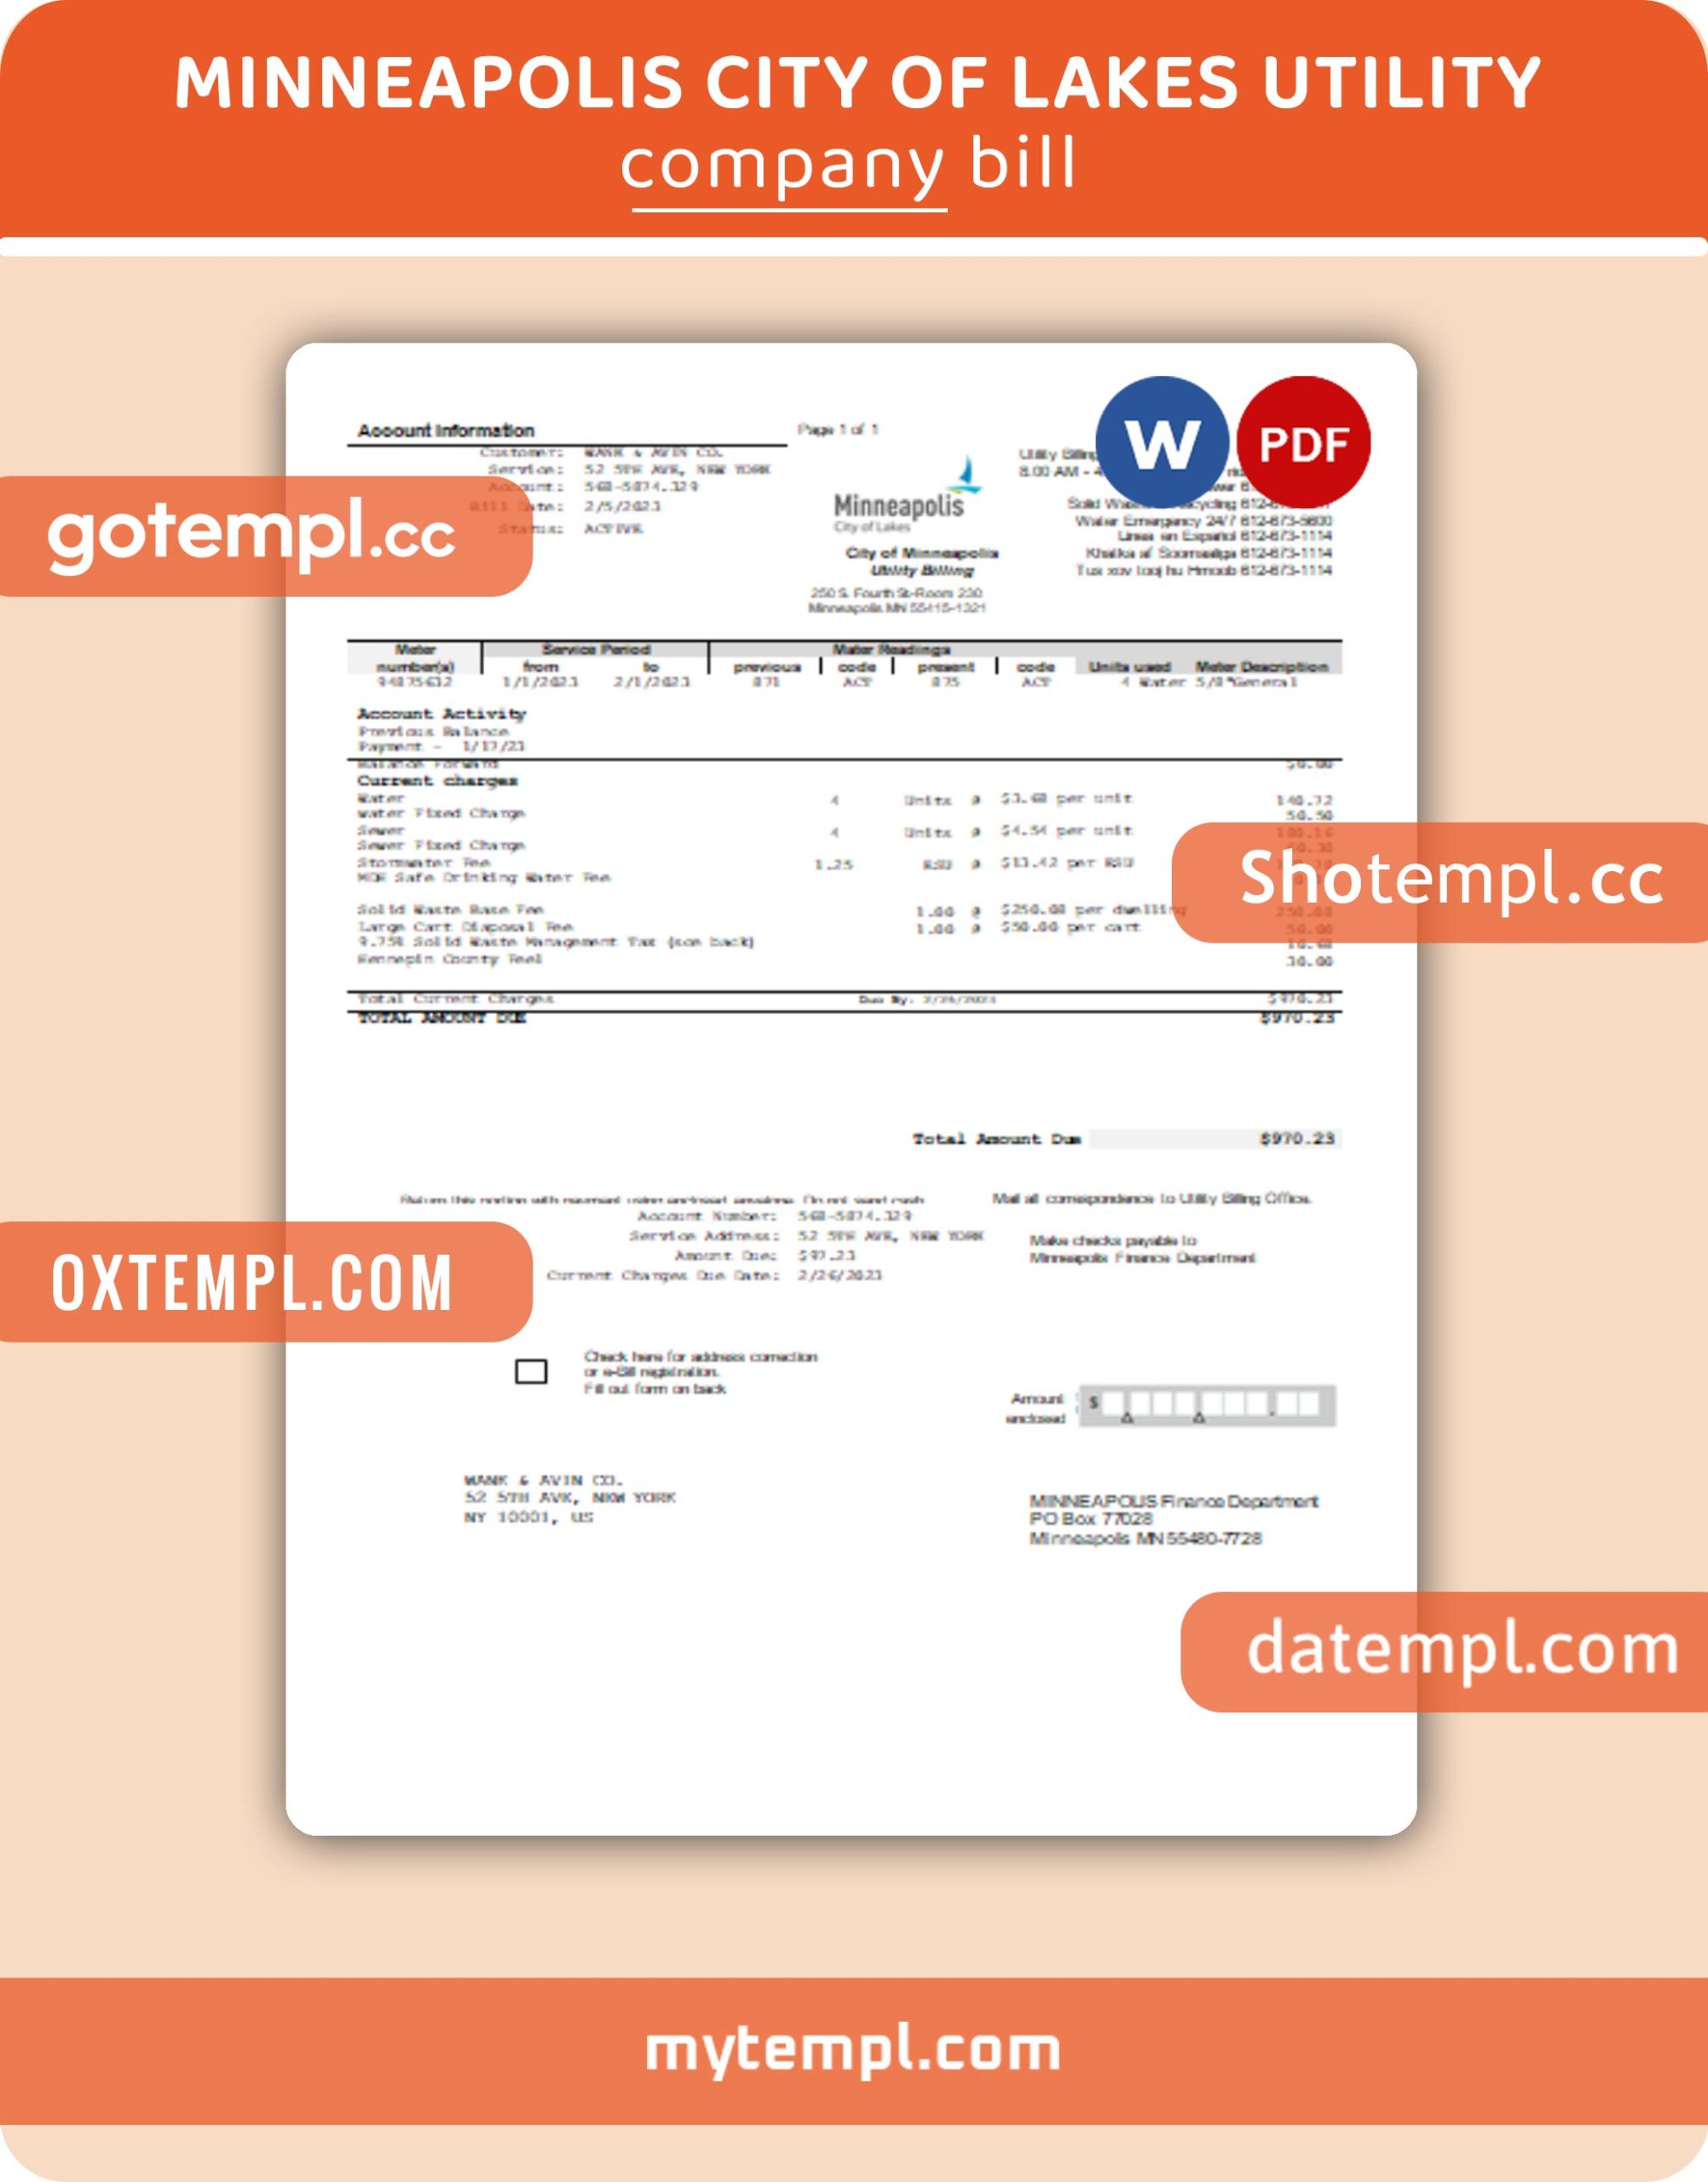 Austria Wasserverband Steinberg water utility bill template in Word and PDF format